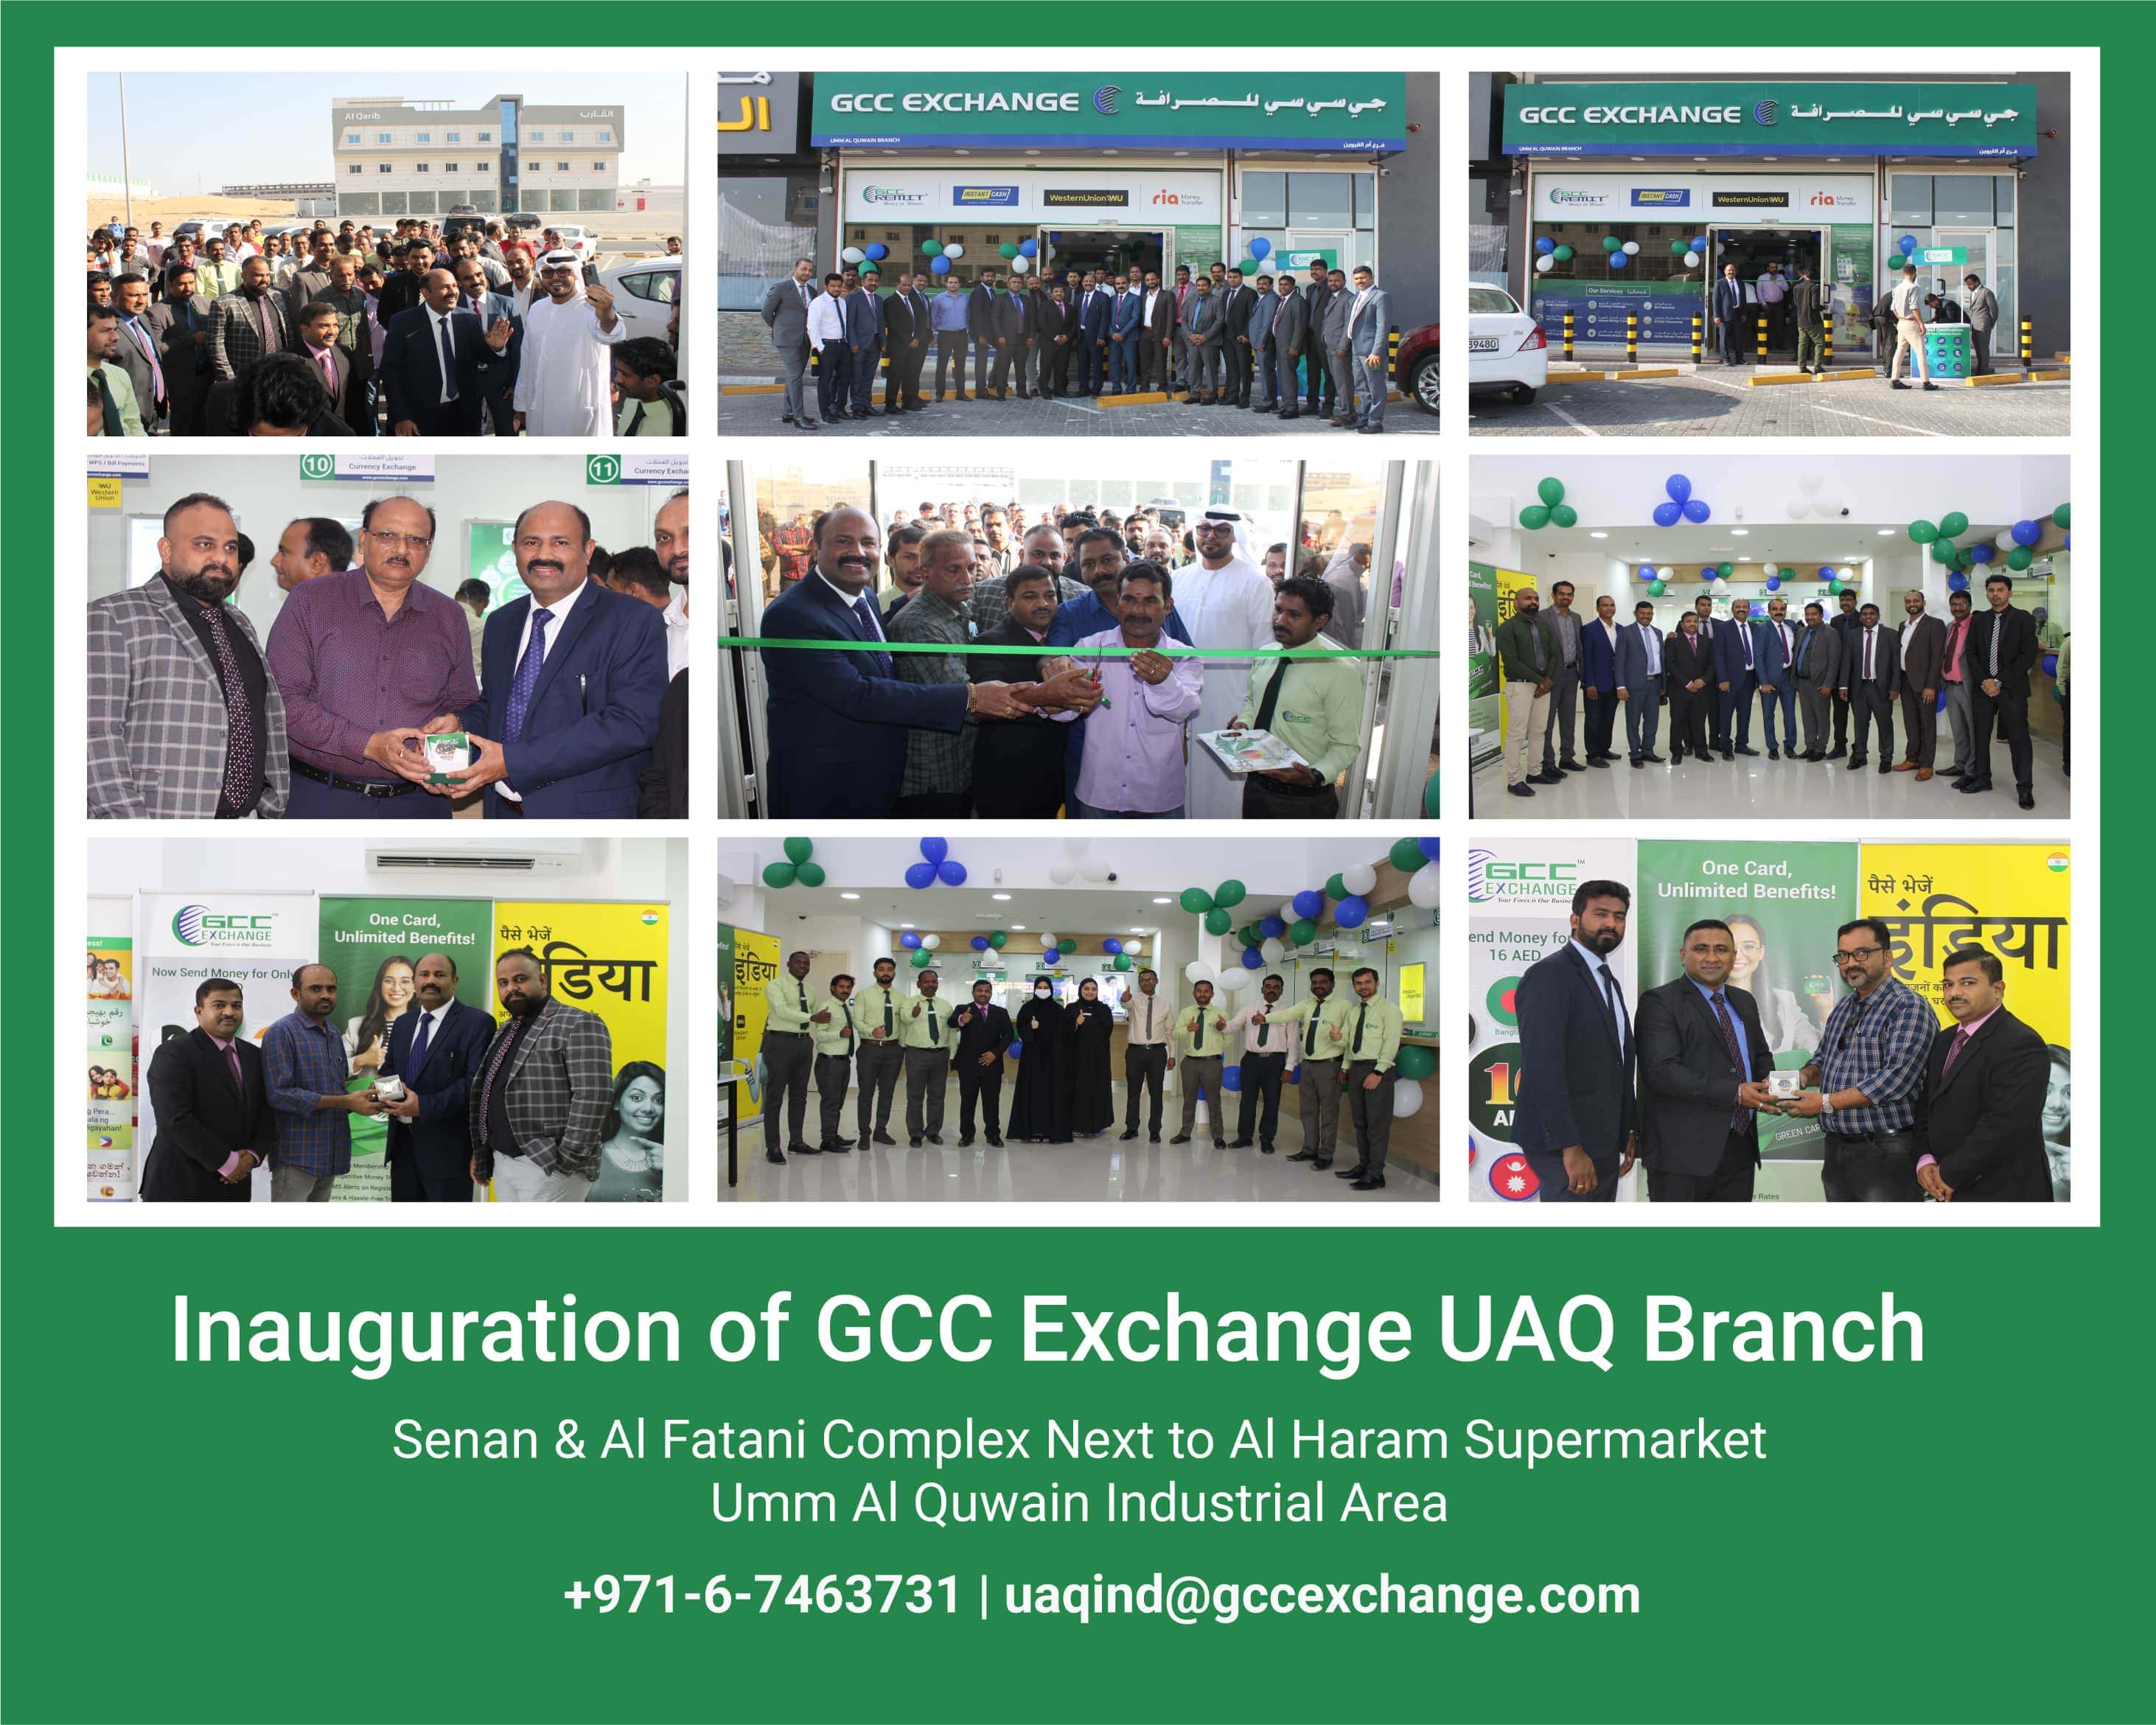 GCC Exchange Hits the Mark with their 10th Branch in UAE